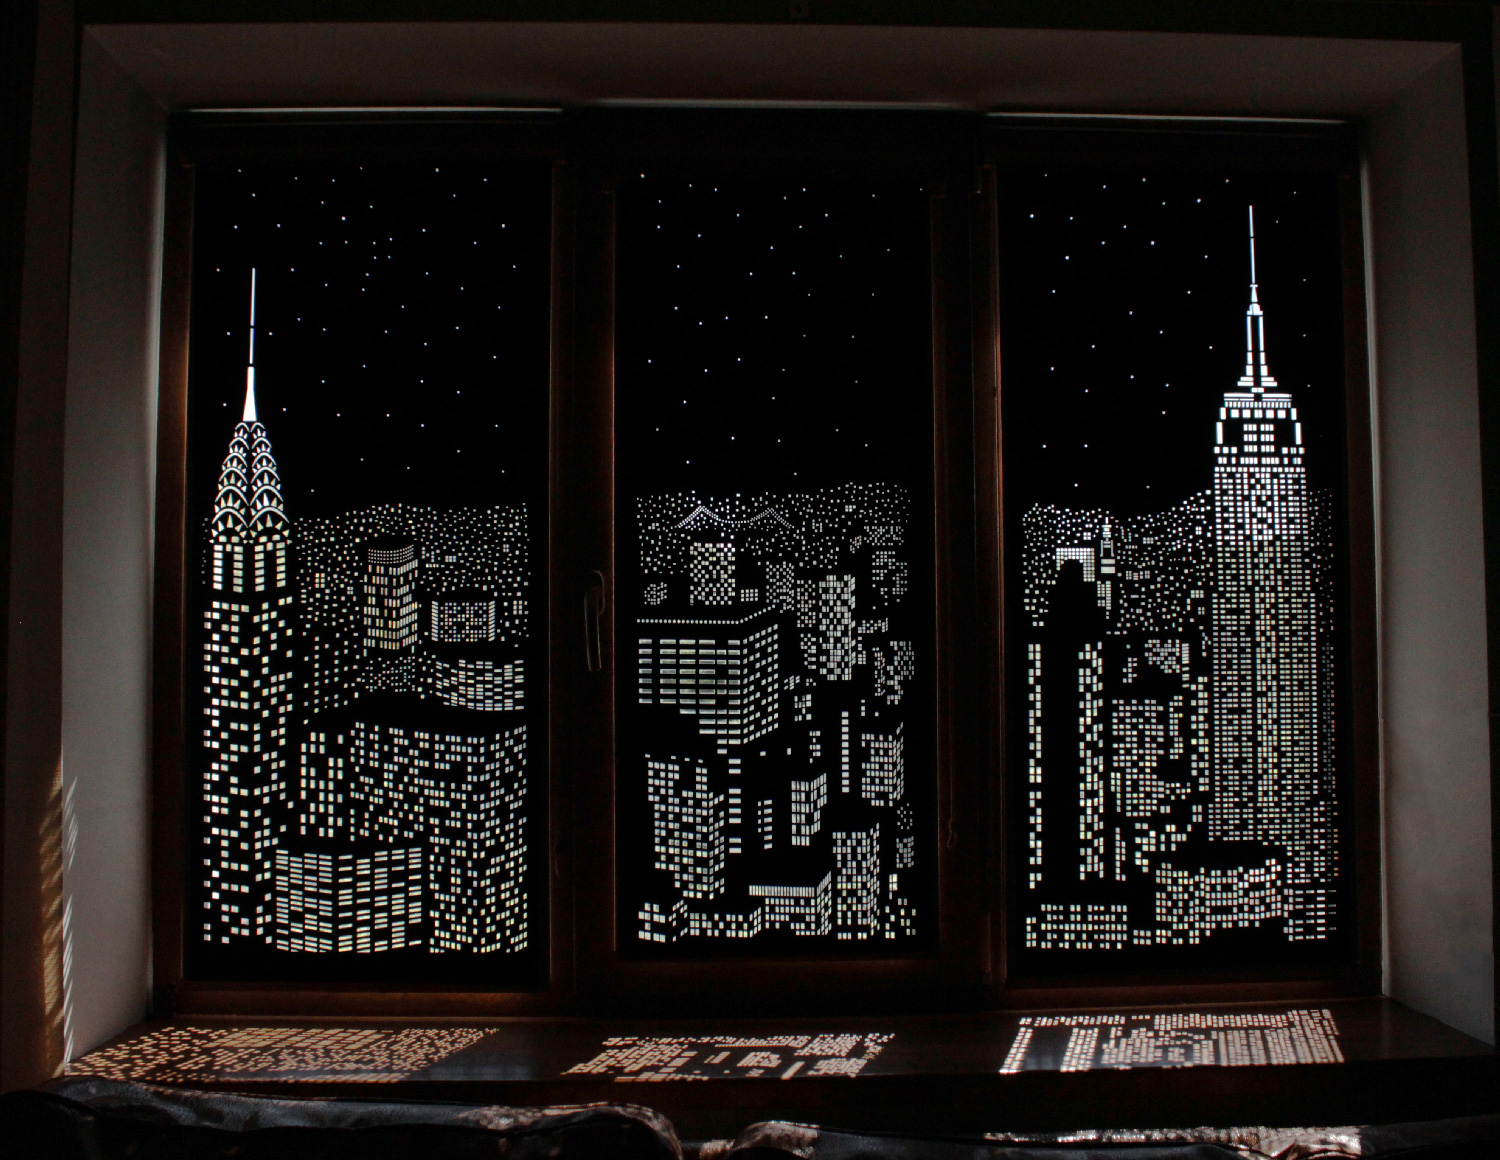 Closing set of blackout blinds, with the New York City skyline etched into them for decorative effect.